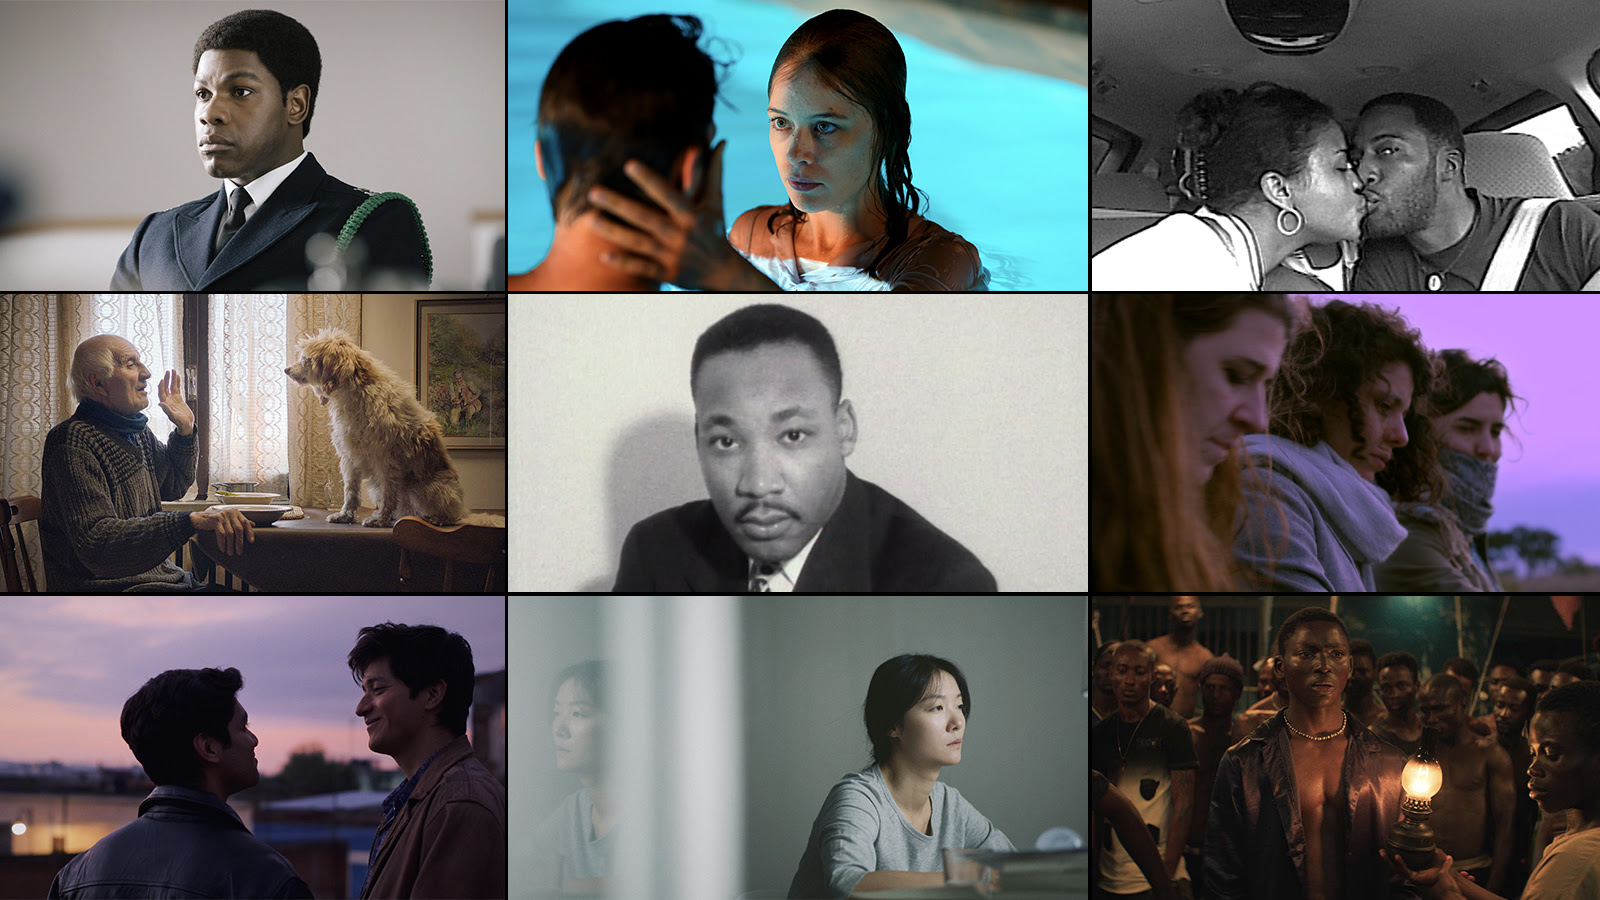 grid of scenes from films at the 58th Annual New York Film Festival